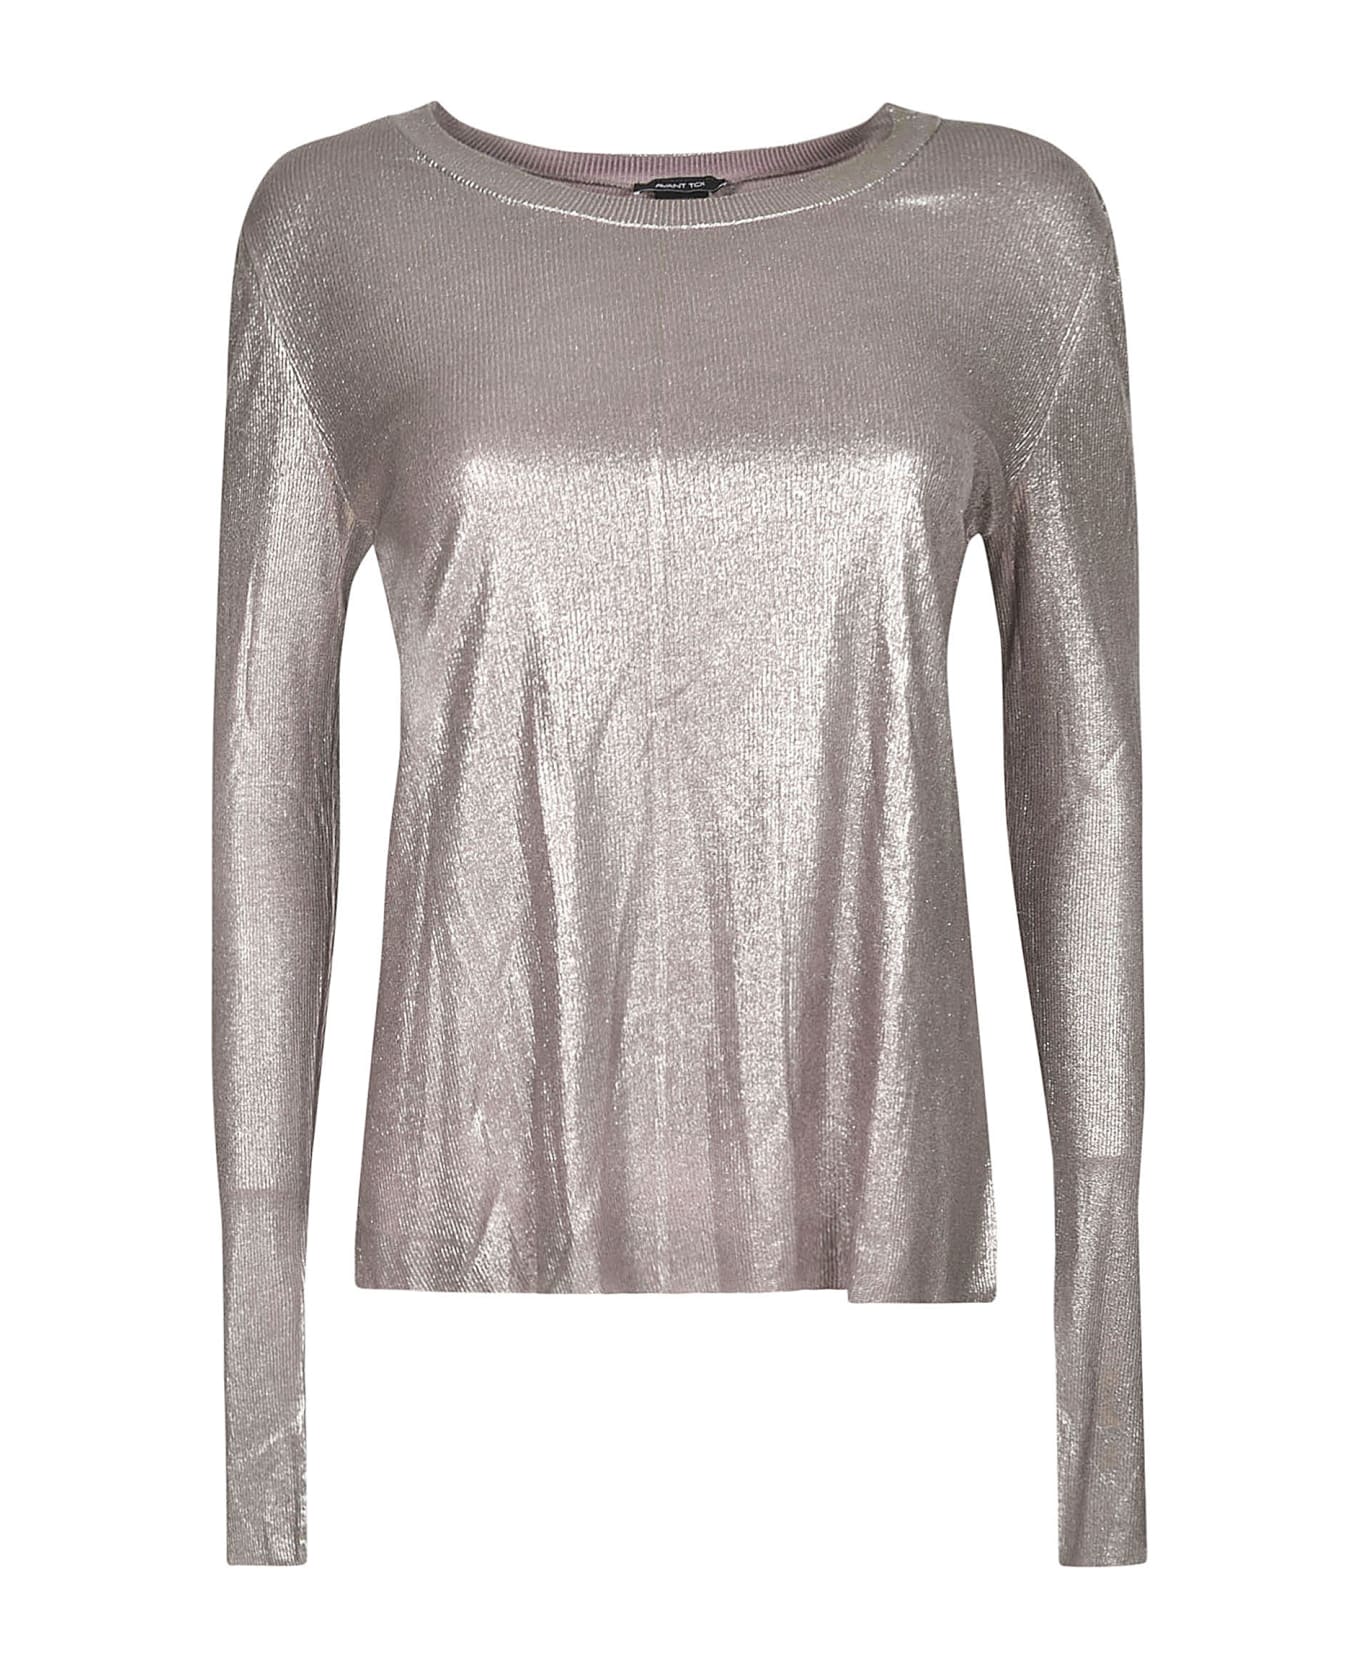 Avant Toi All-over Glitter Embellished Sweater - Purple